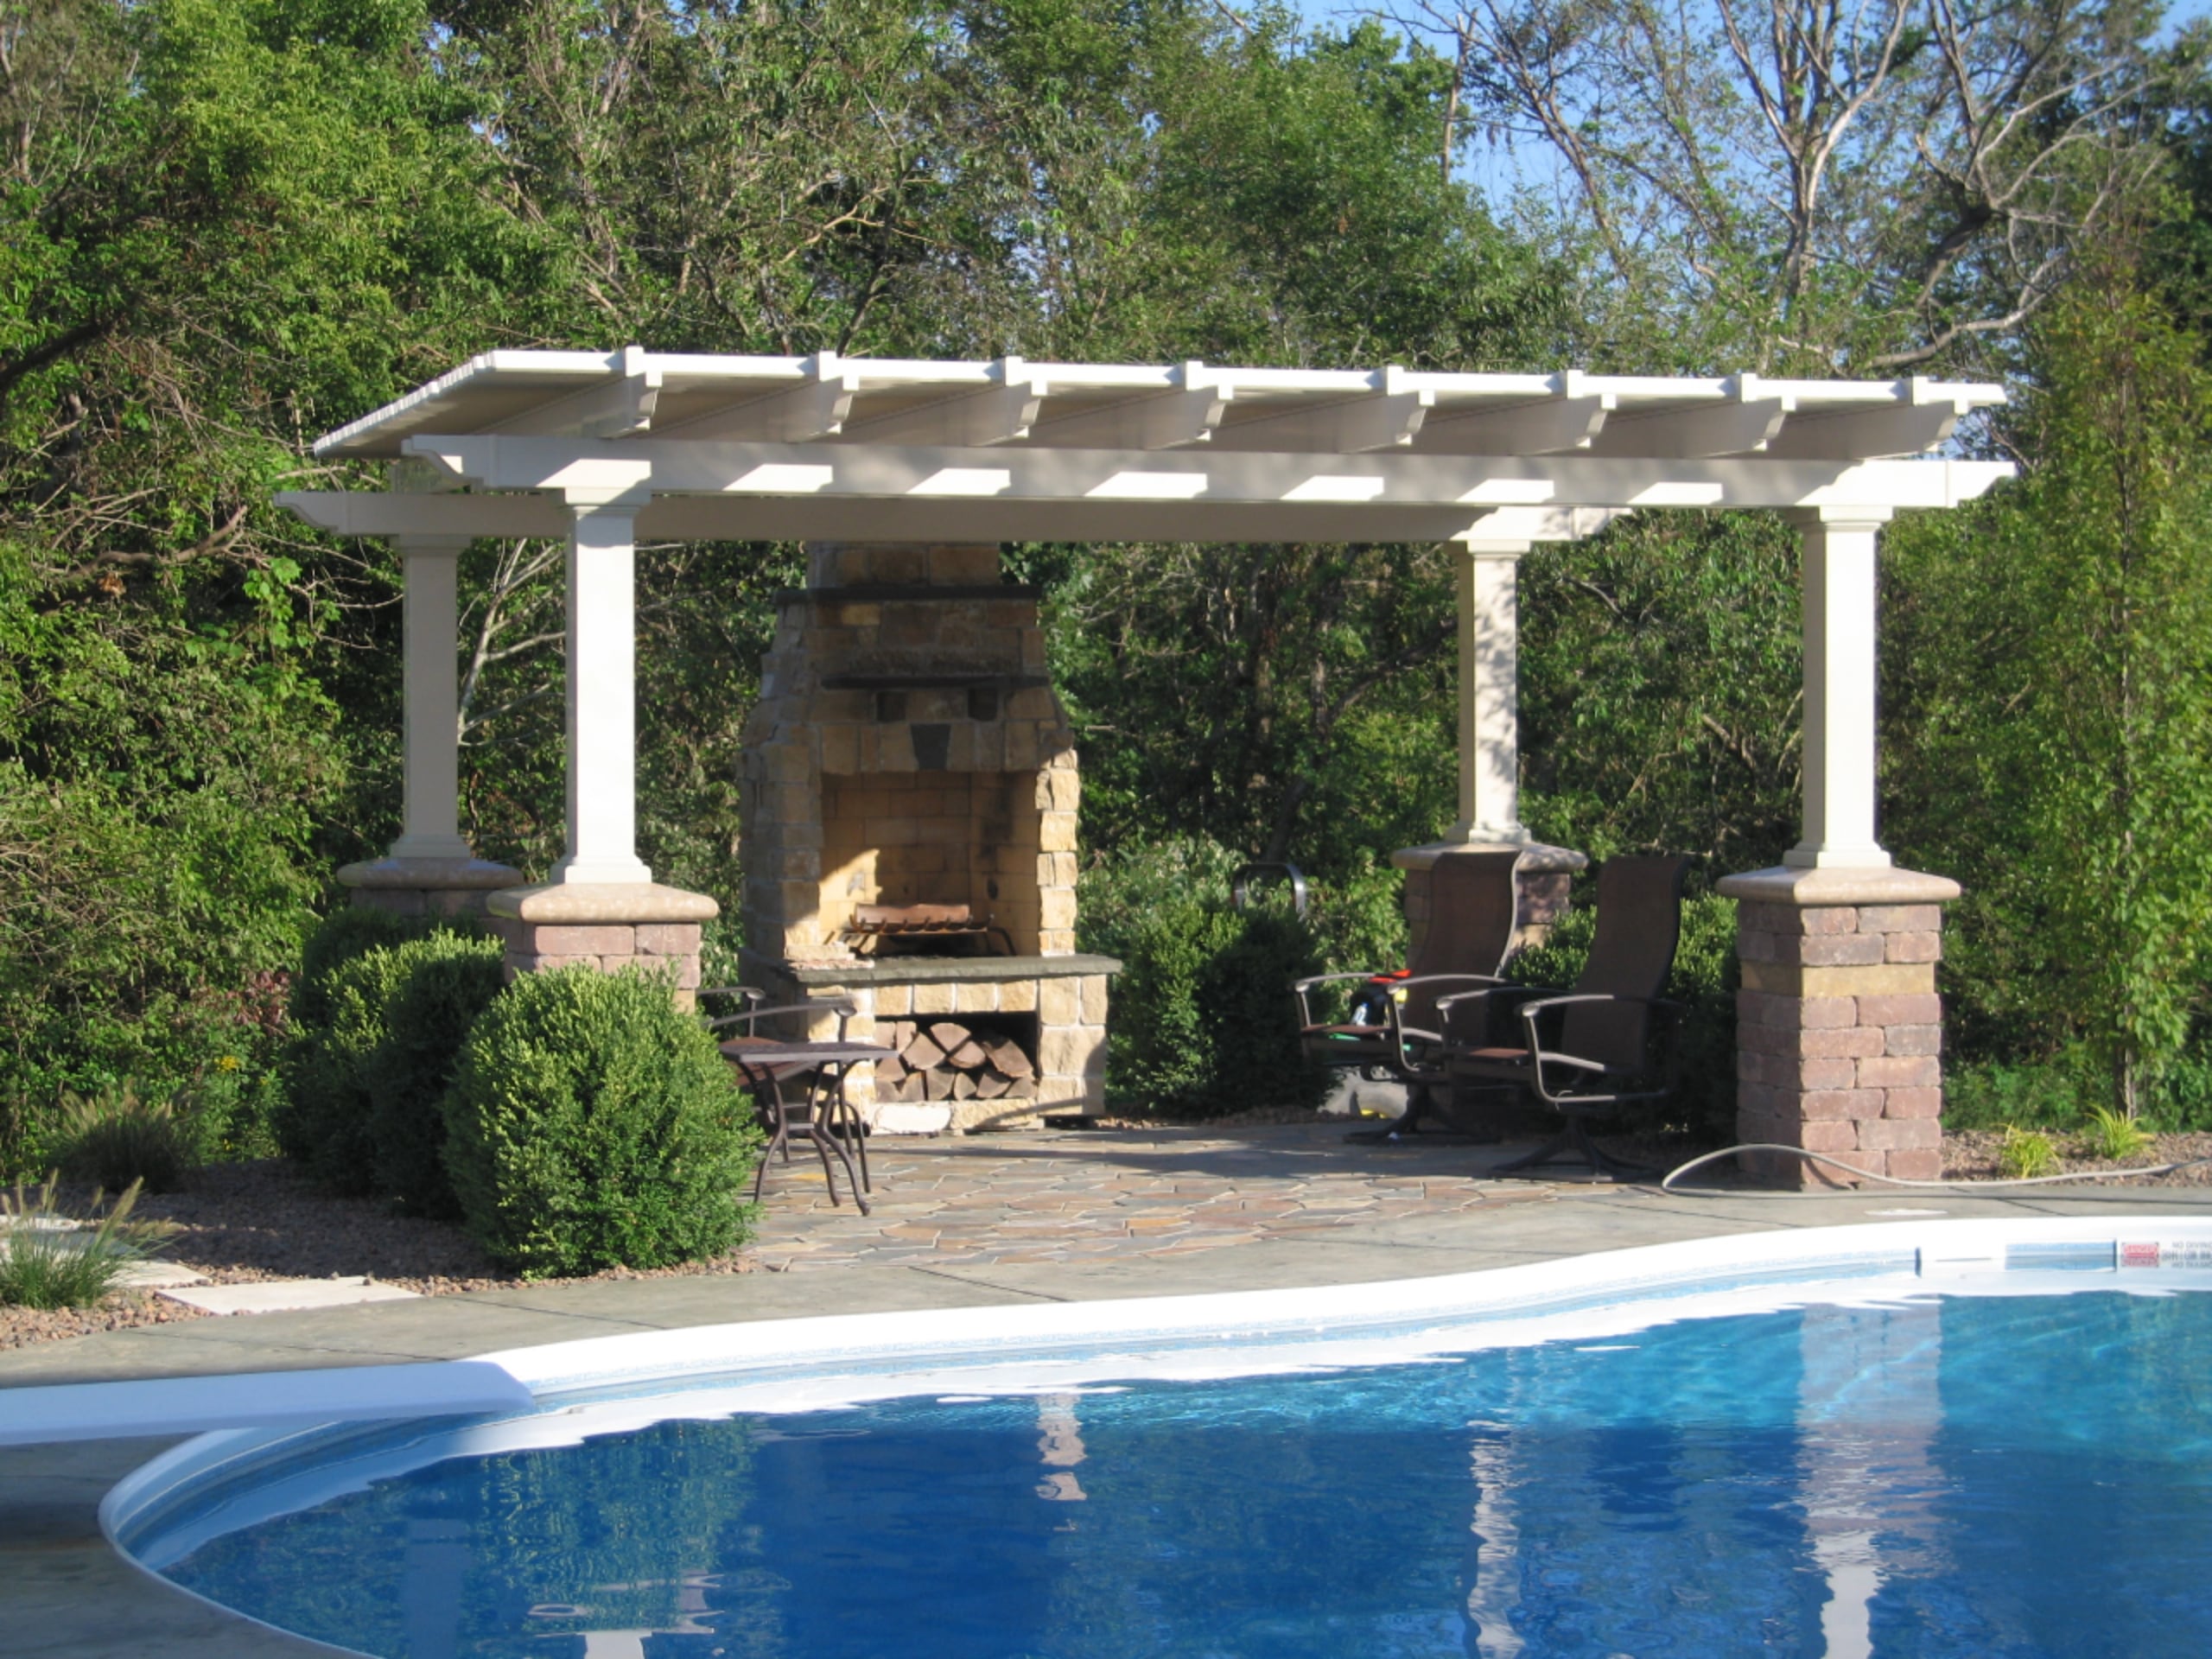 This white pergola is resting on brick pillars, covering an outdoor eating area next to an inground pool. There are trees behind the eating area and bushes next to the pillars.